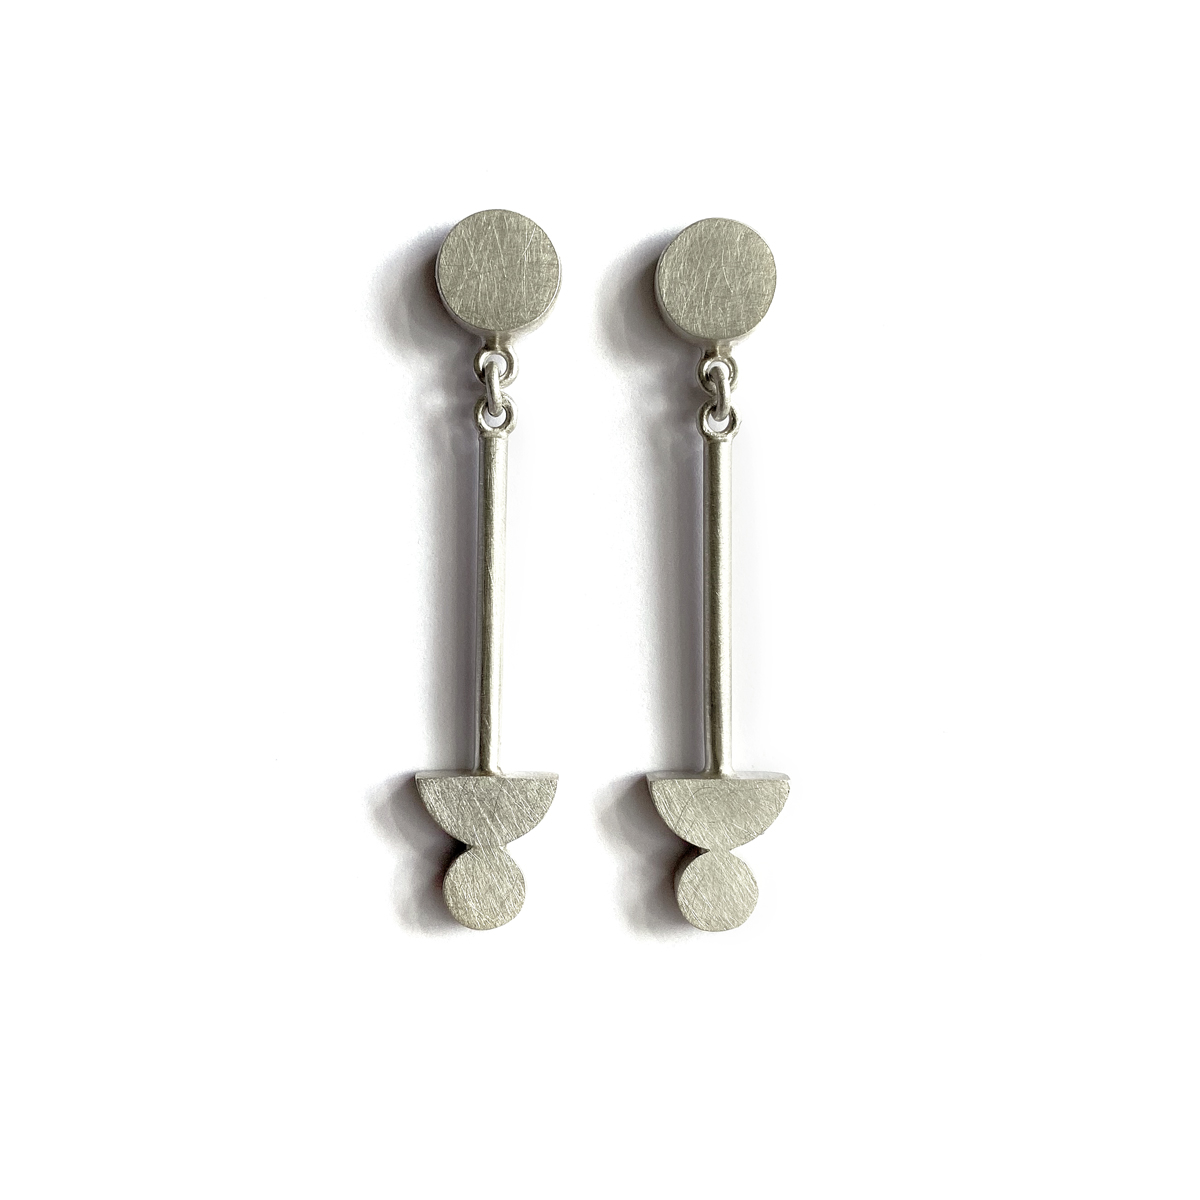 Matter of Balance Earrings, sterling silver, 2020, Kate Alterio